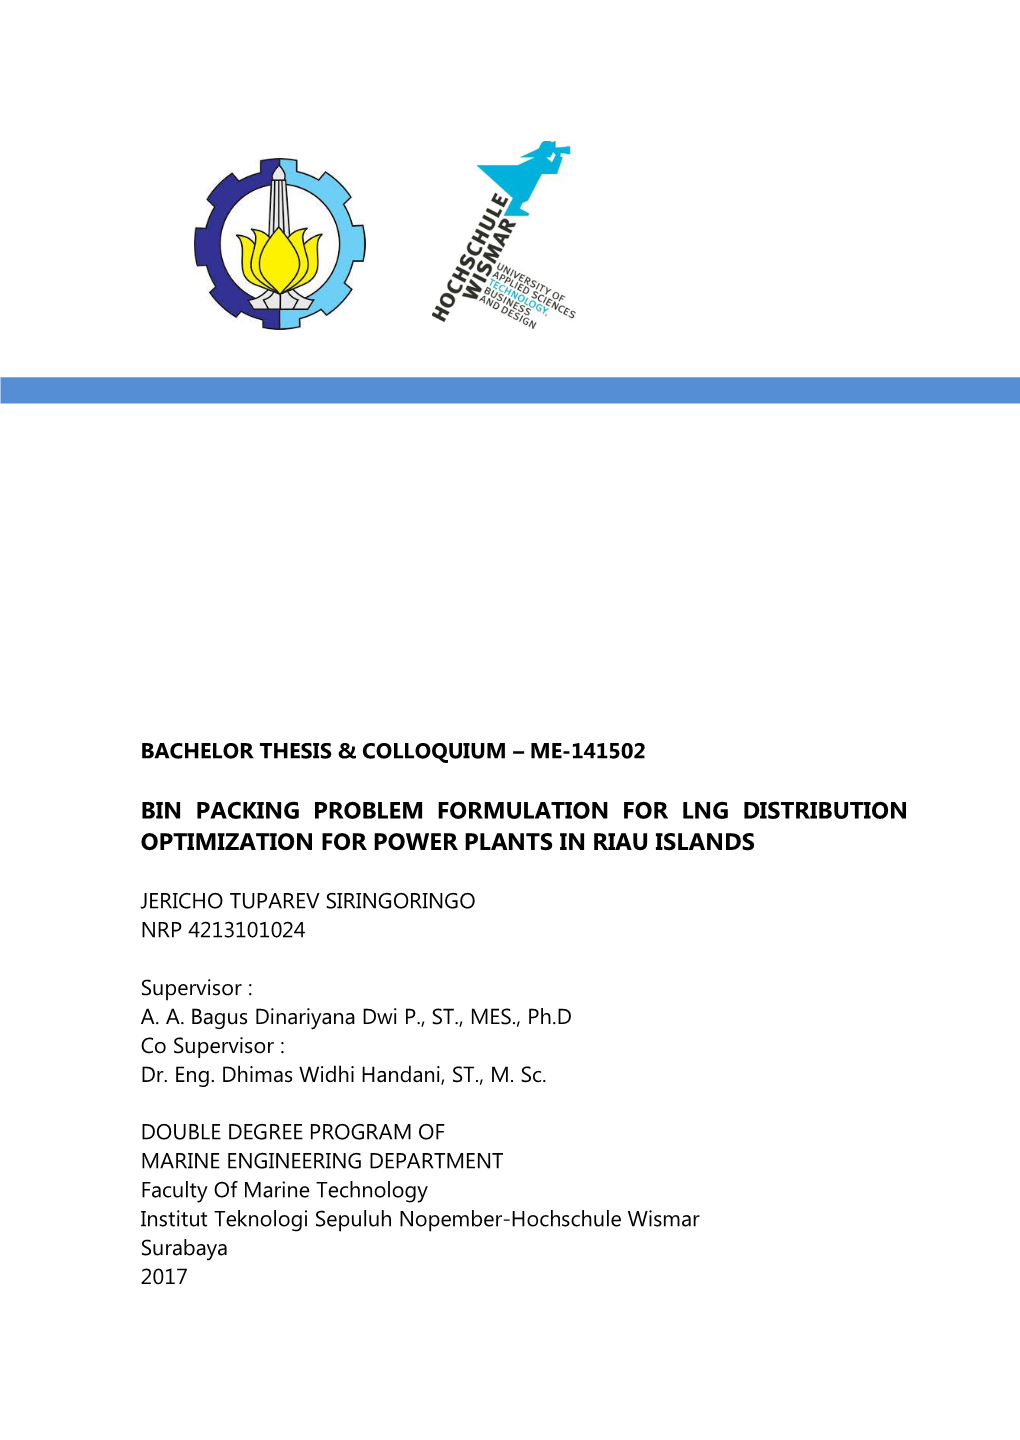 Bin Packing Problem Formulation for Lng Distribution Optimization for Power Plants in Riau Islands